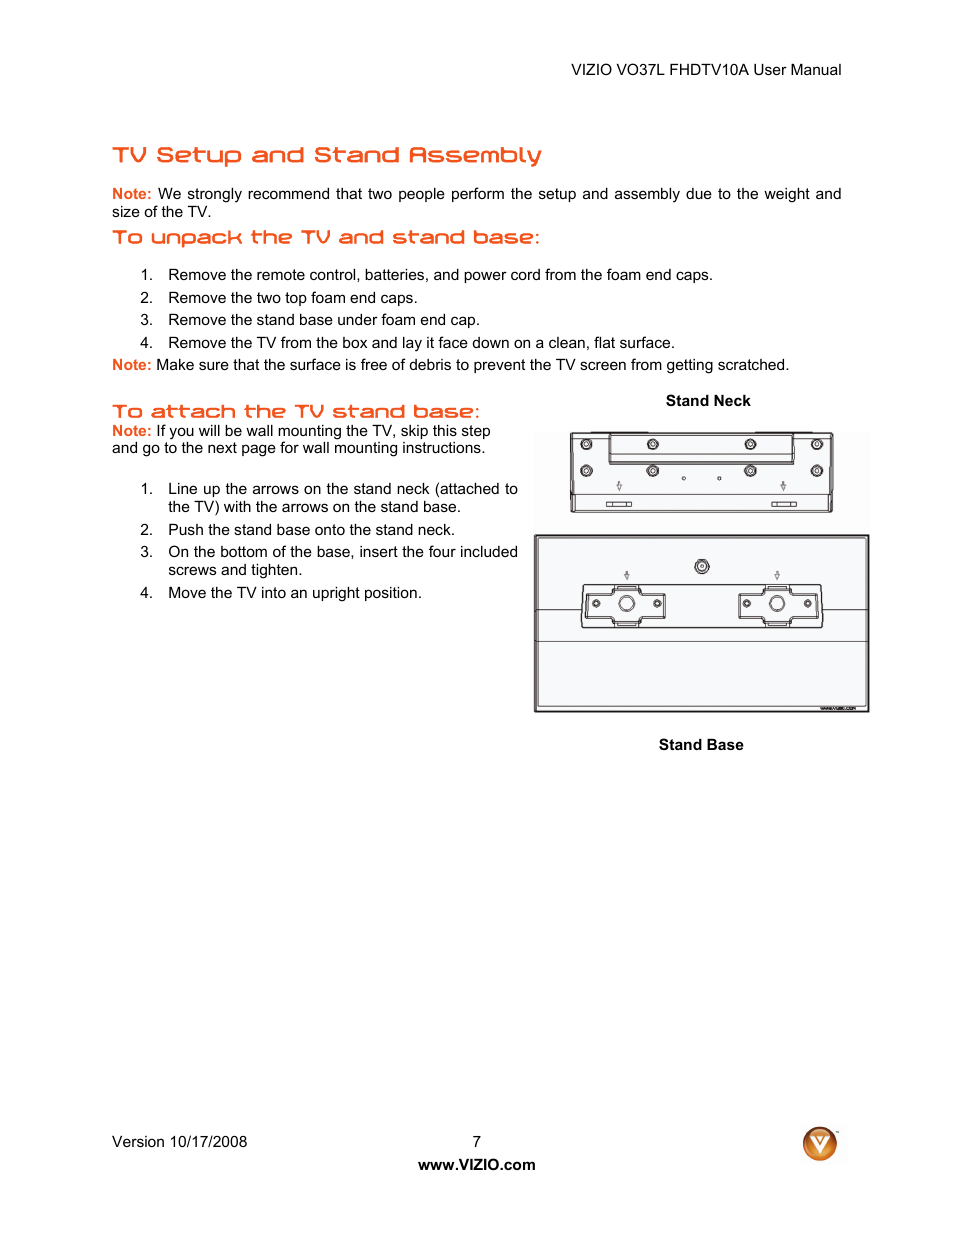 Tv setup and stand assembly | Vizio VO37L FHDTV10A User Manual | Page 7 / 80